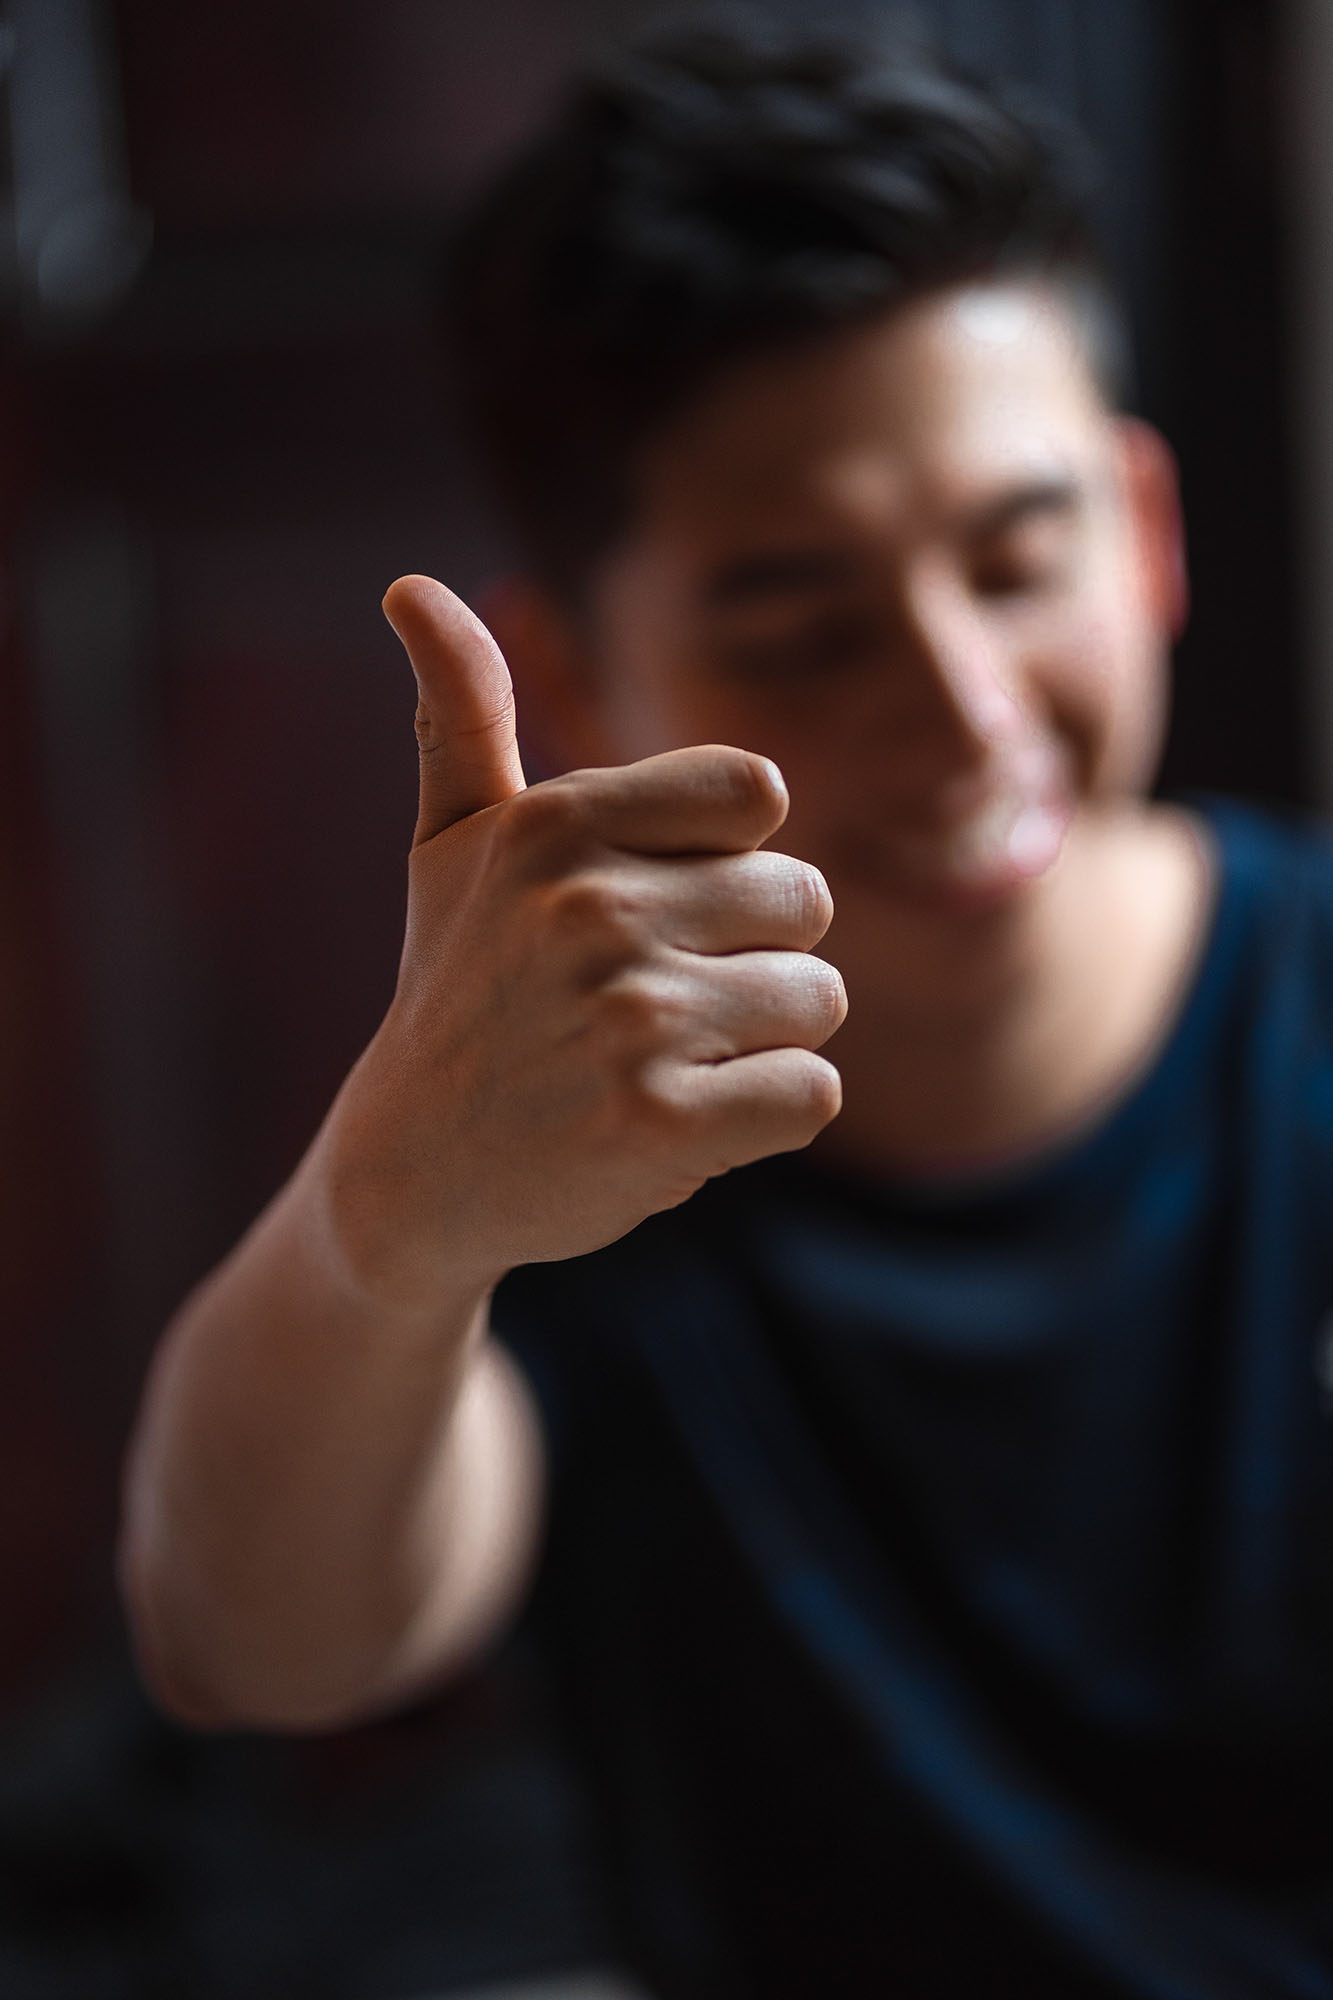 thumbs up with blurred background